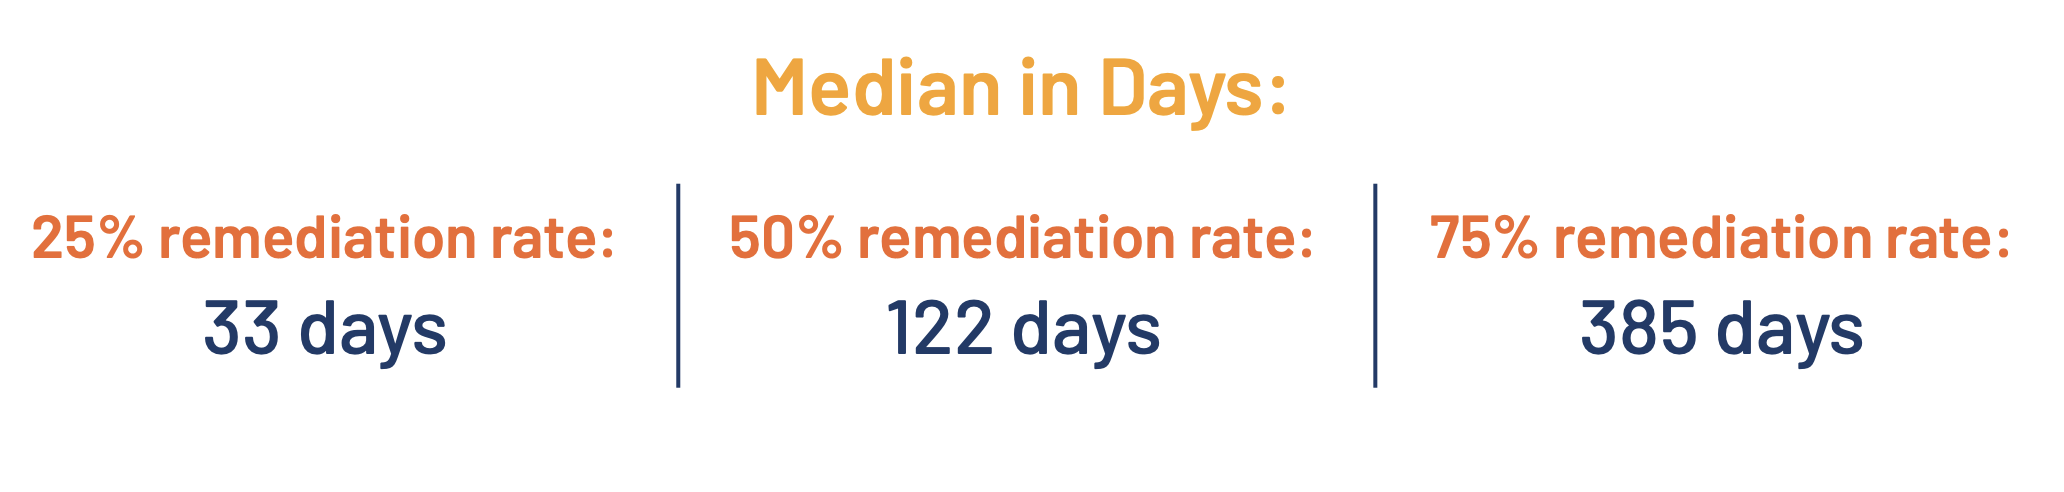 Stylized figures - Median remediation rate in days